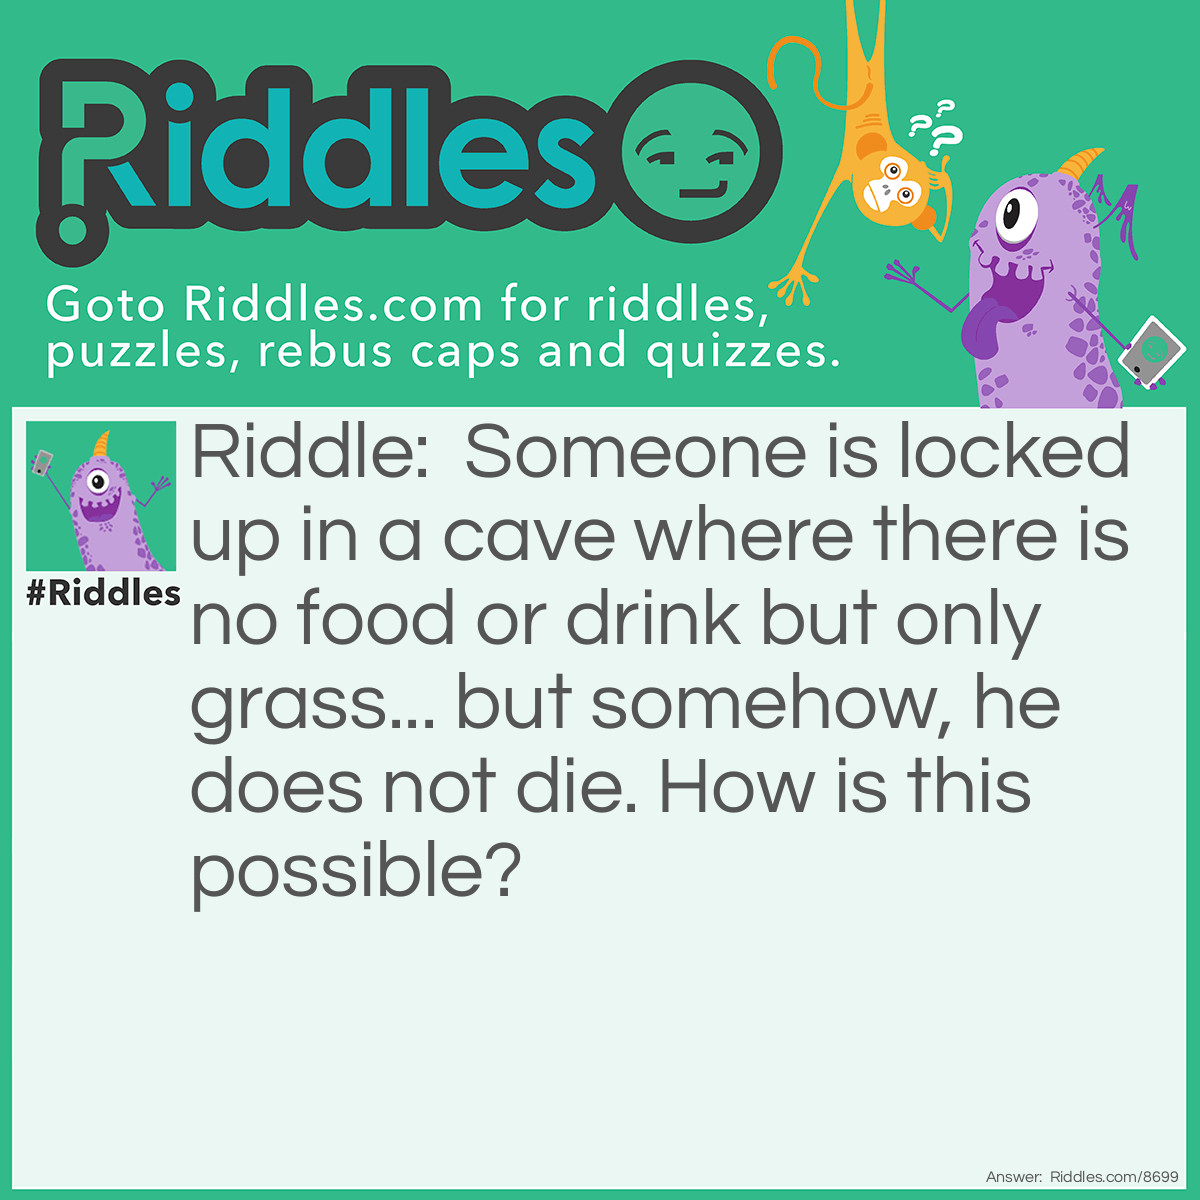 Riddle: Someone is locked up in a cave where there is no food or drink but only grass... but somehow, he does not die. How is this possible? Answer: He is a cow